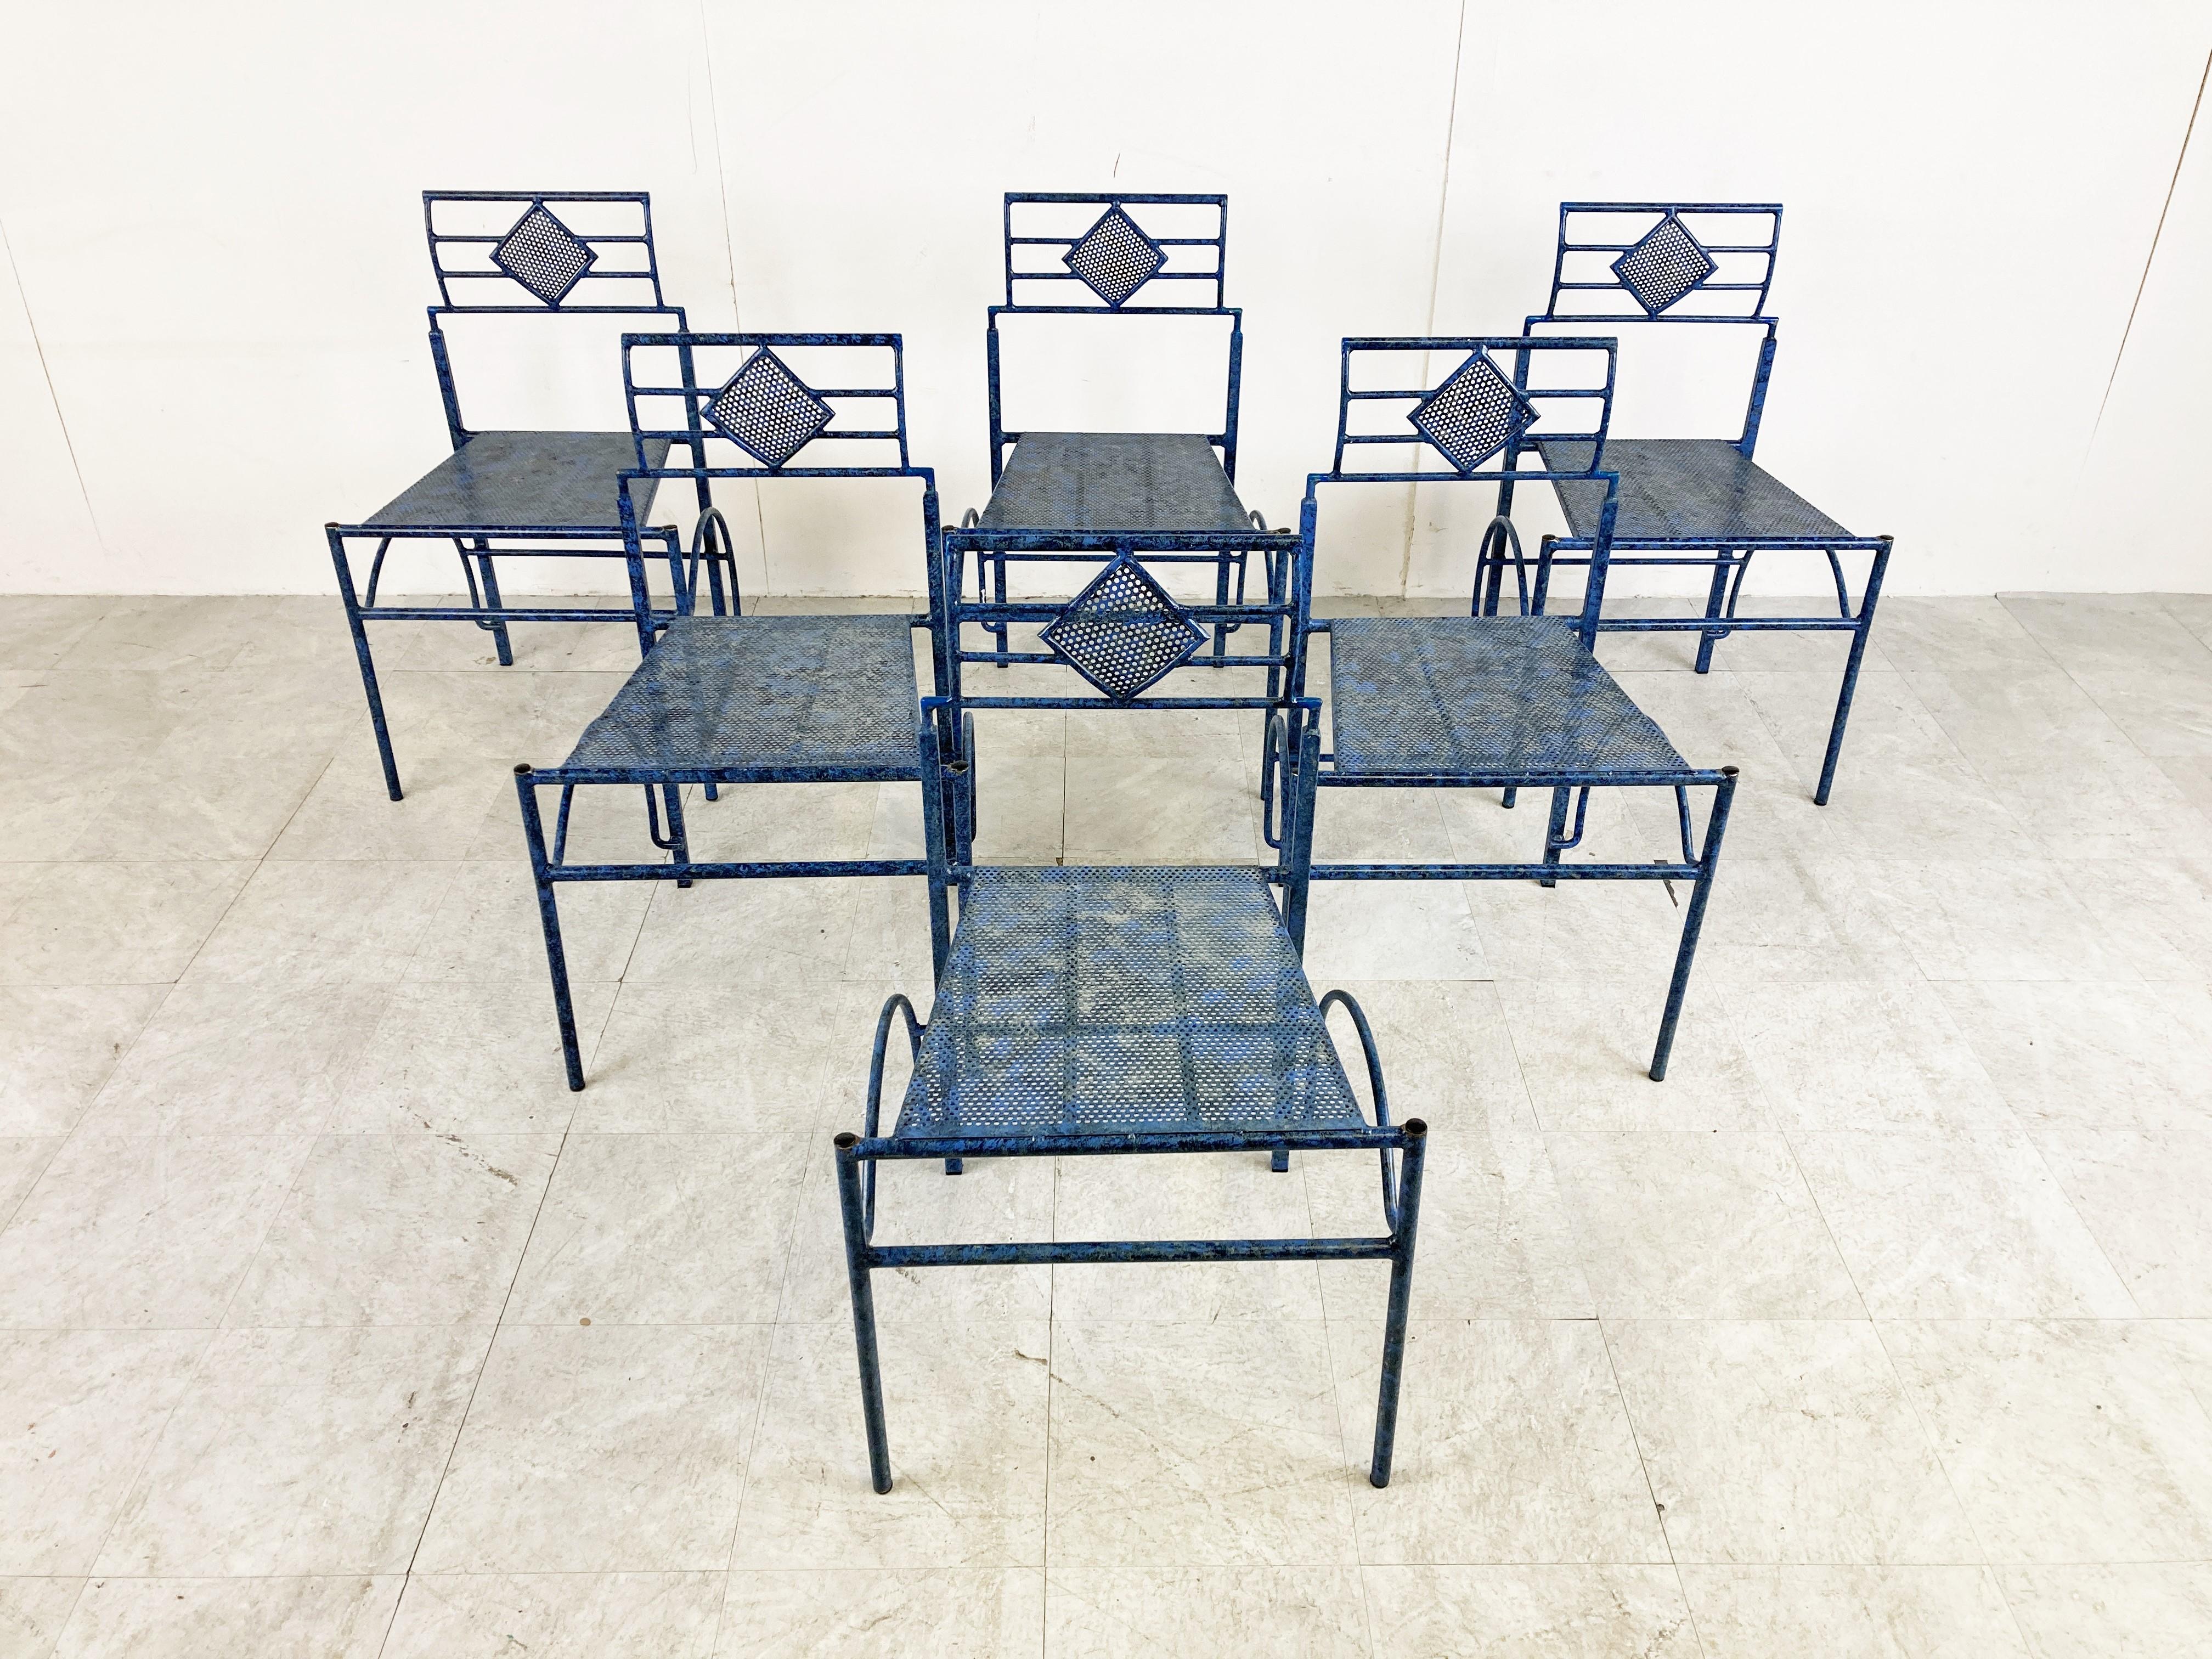 Vintage post modern blue metal dining chairs.

The chairs have a unique and attractive design with perforated seats.

This set can be used inside and outside.

1980s - Italy

Very good condition

Dimensions:
Height: 83cm/32.67